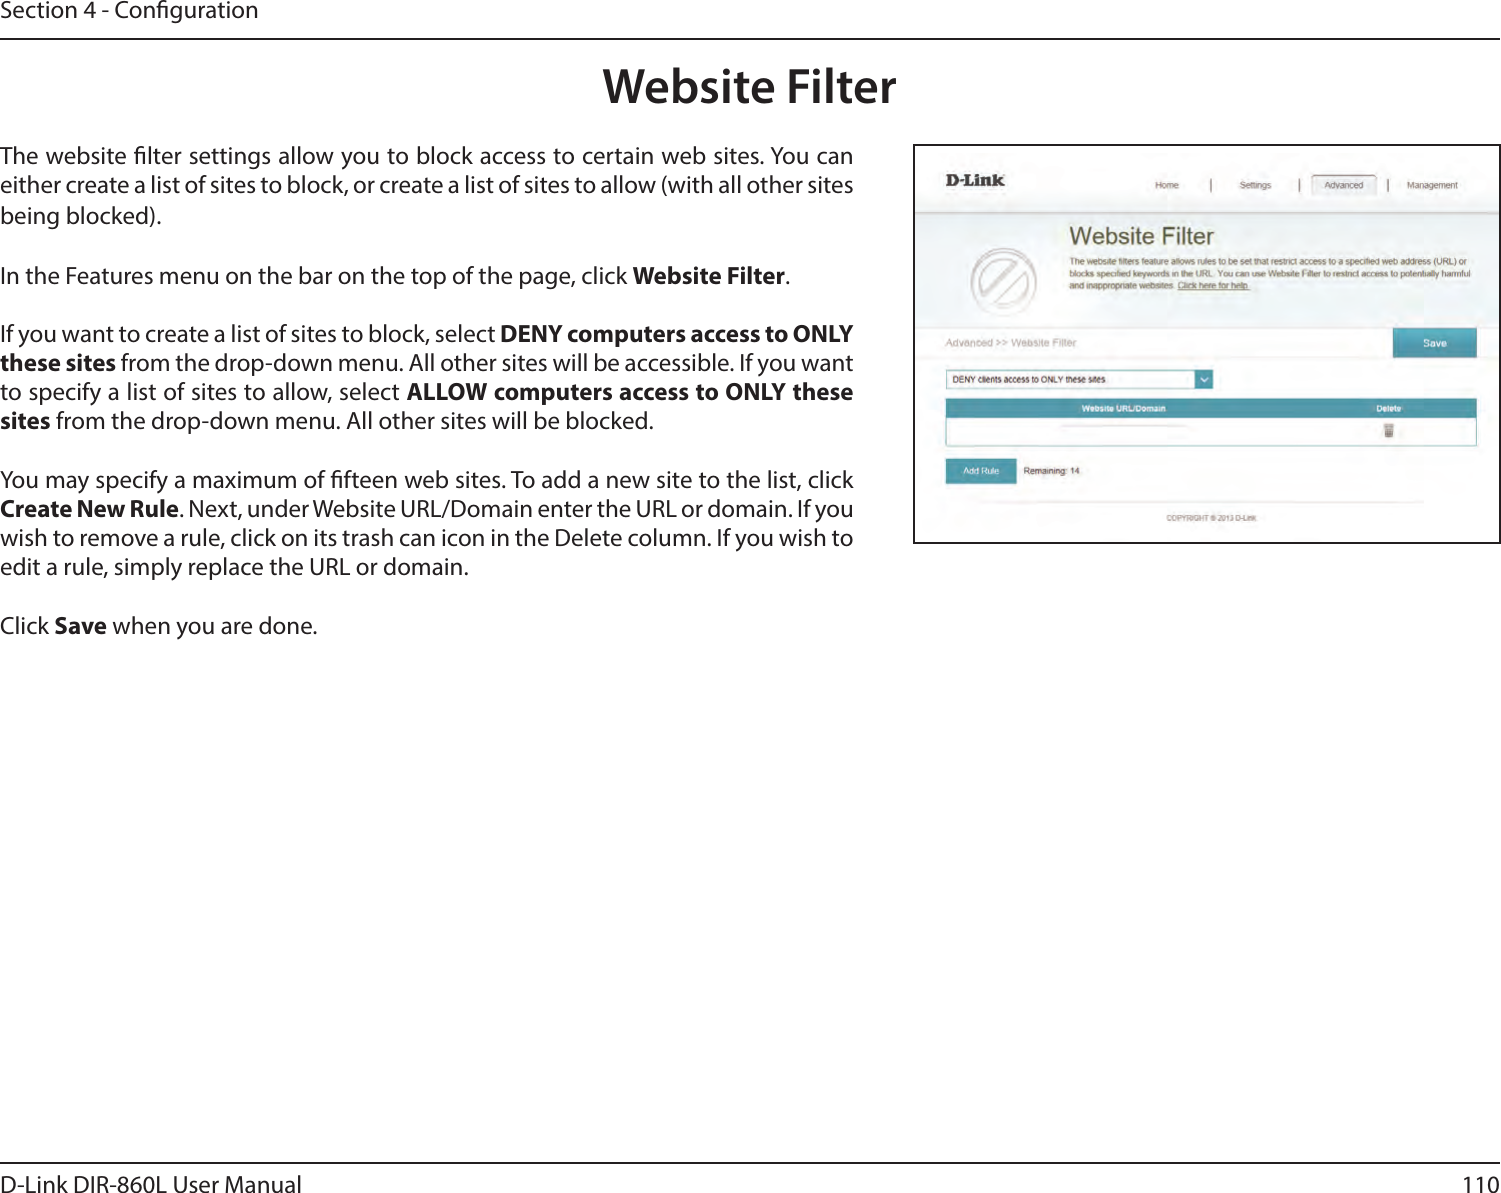 110D-Link DIR-860L User ManualSection 4 - CongurationWebsite FilterThe website lter settings allow you to block access to certain web sites. You can either create a list of sites to block, or create a list of sites to allow (with all other sites being blocked).In the Features menu on the bar on the top of the page, click Website Filter.If you want to create a list of sites to block, select DENY computers access to ONLY these sites from the drop-down menu. All other sites will be accessible. If you want to specify a list of sites to allow, select ALLOW computers access to ONLY these sites from the drop-down menu. All other sites will be blocked.You may specify a maximum of fteen web sites. To add a new site to the list, click Create New Rule. Next, under Website URL/Domain enter the URL or domain. If you wish to remove a rule, click on its trash can icon in the Delete column. If you wish to edit a rule, simply replace the URL or domain.Click Save when you are done.